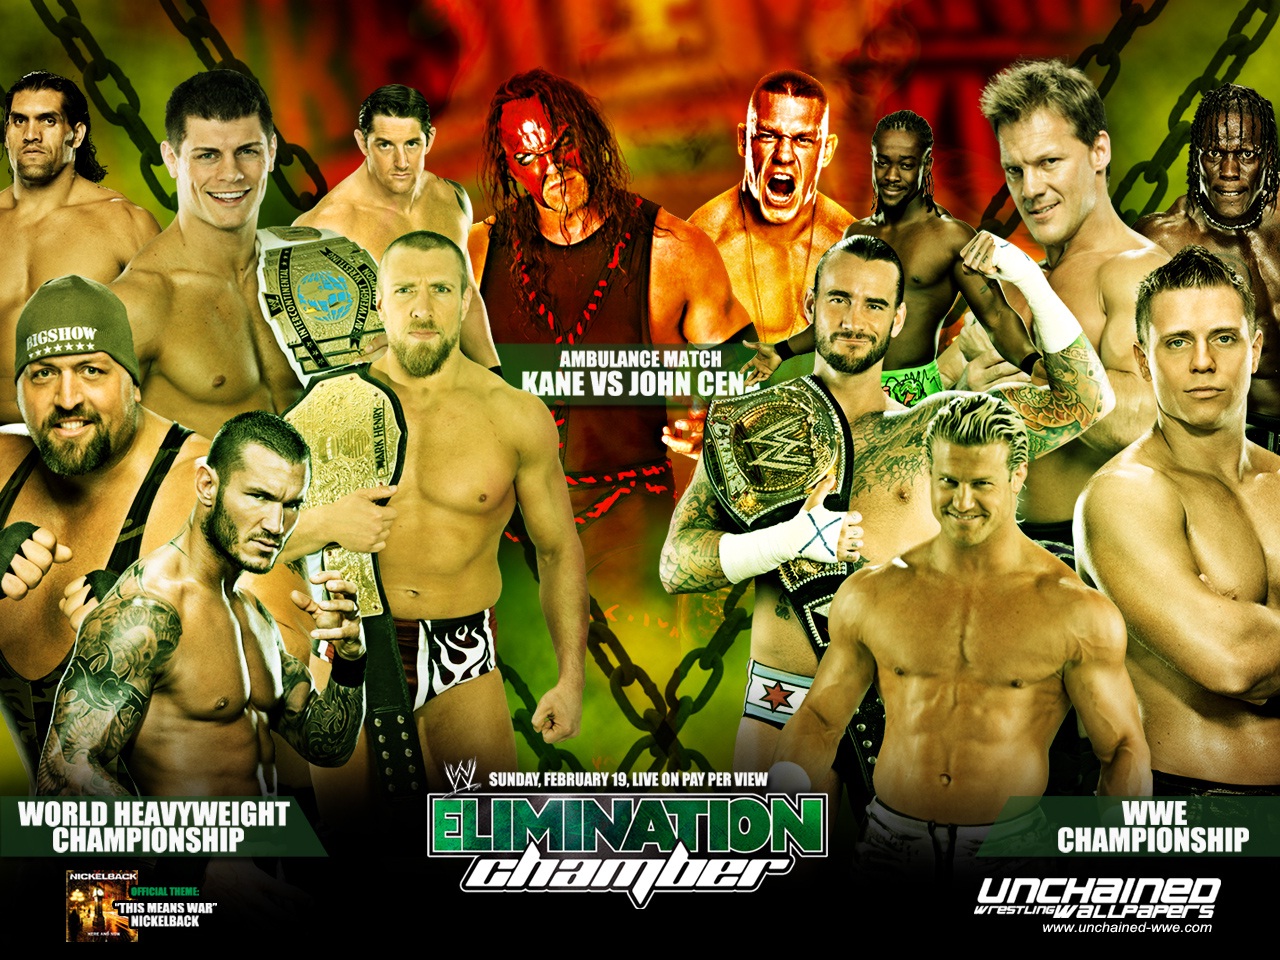 WWE Elimination Chamber 2012 Wallpaper by VBTIGERBOMB